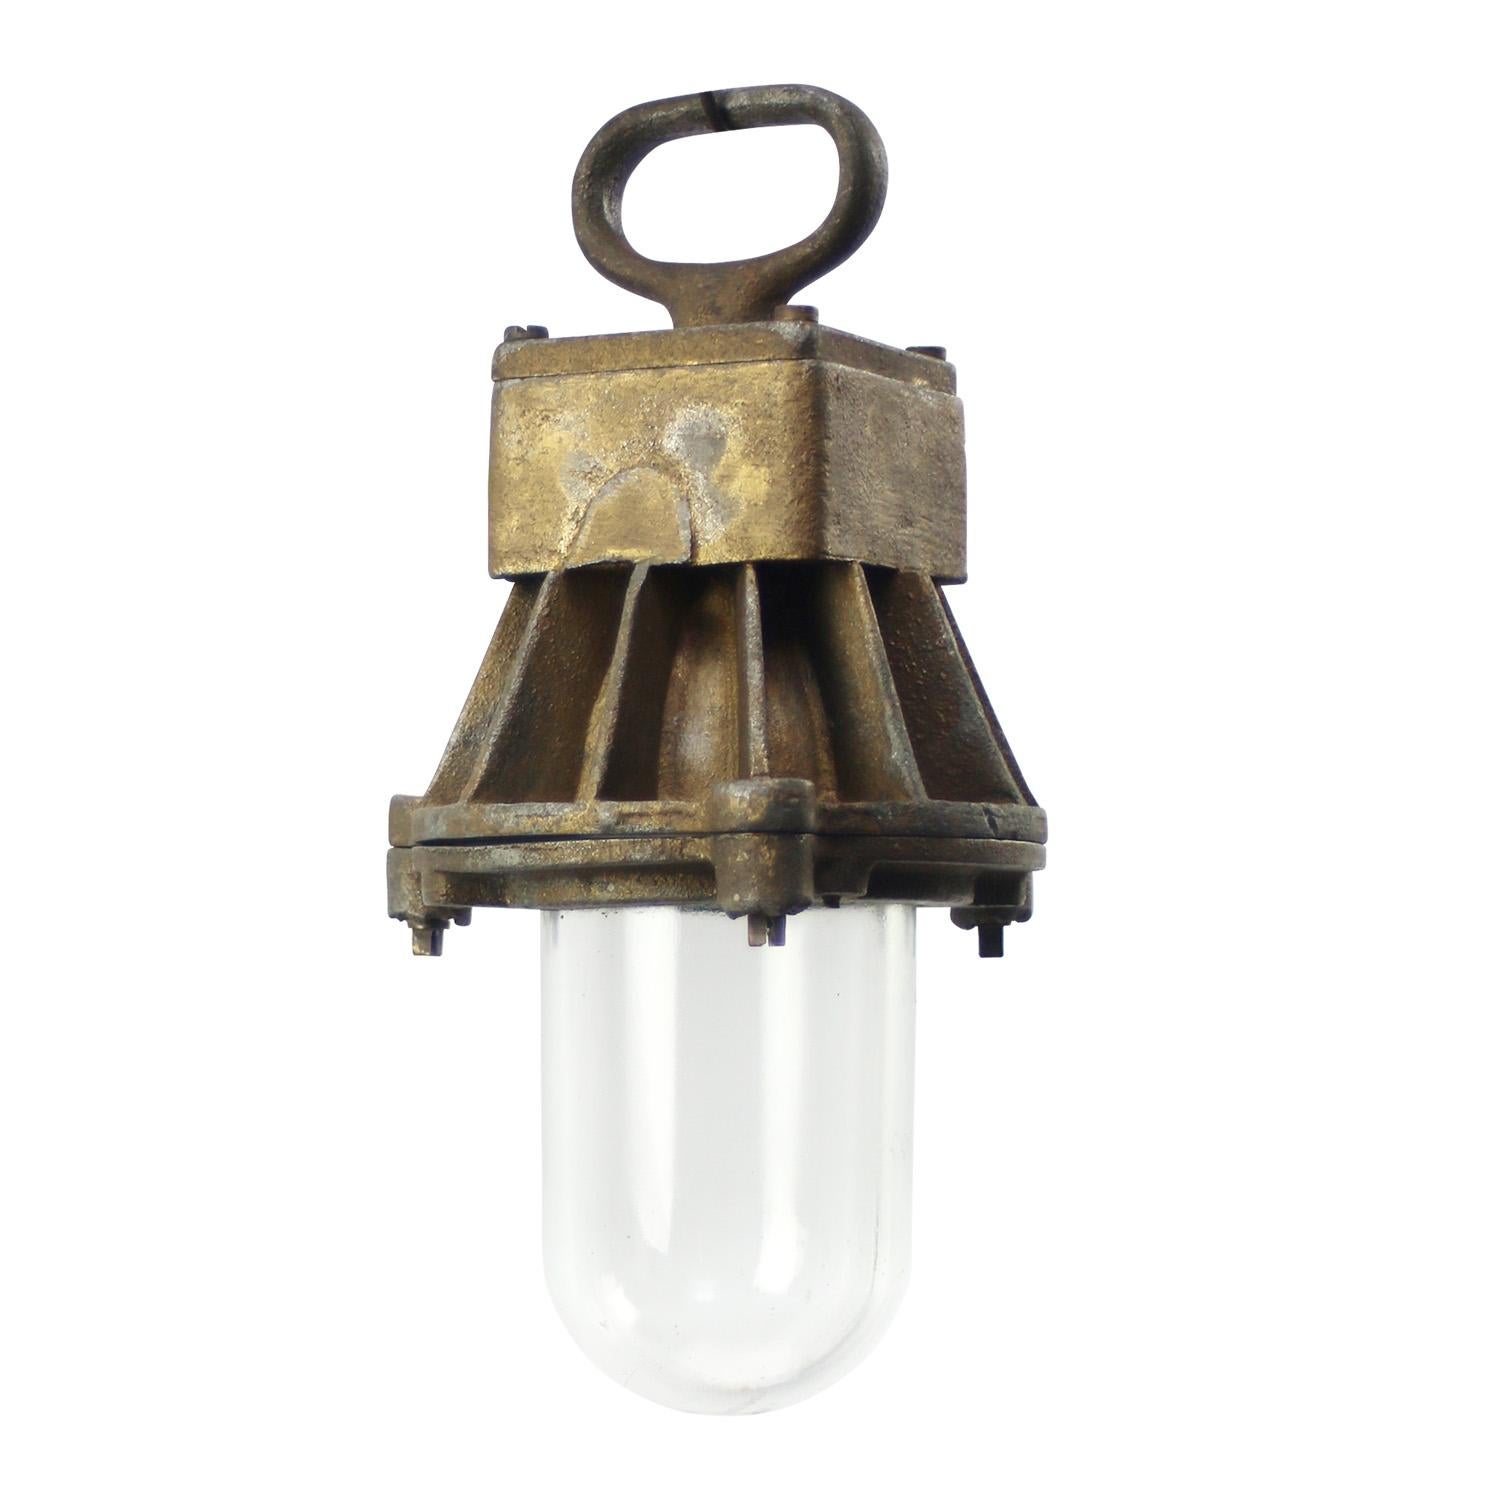 Industrial pendant lamp
Cast iron, clear glass

Weight 2.20 kg / 4.9 lb

Priced per individual item. All lamps have been made suitable by international standards for incandescent light bulbs, energy-efficient and LED bulbs. E26/E27 bulb holders and